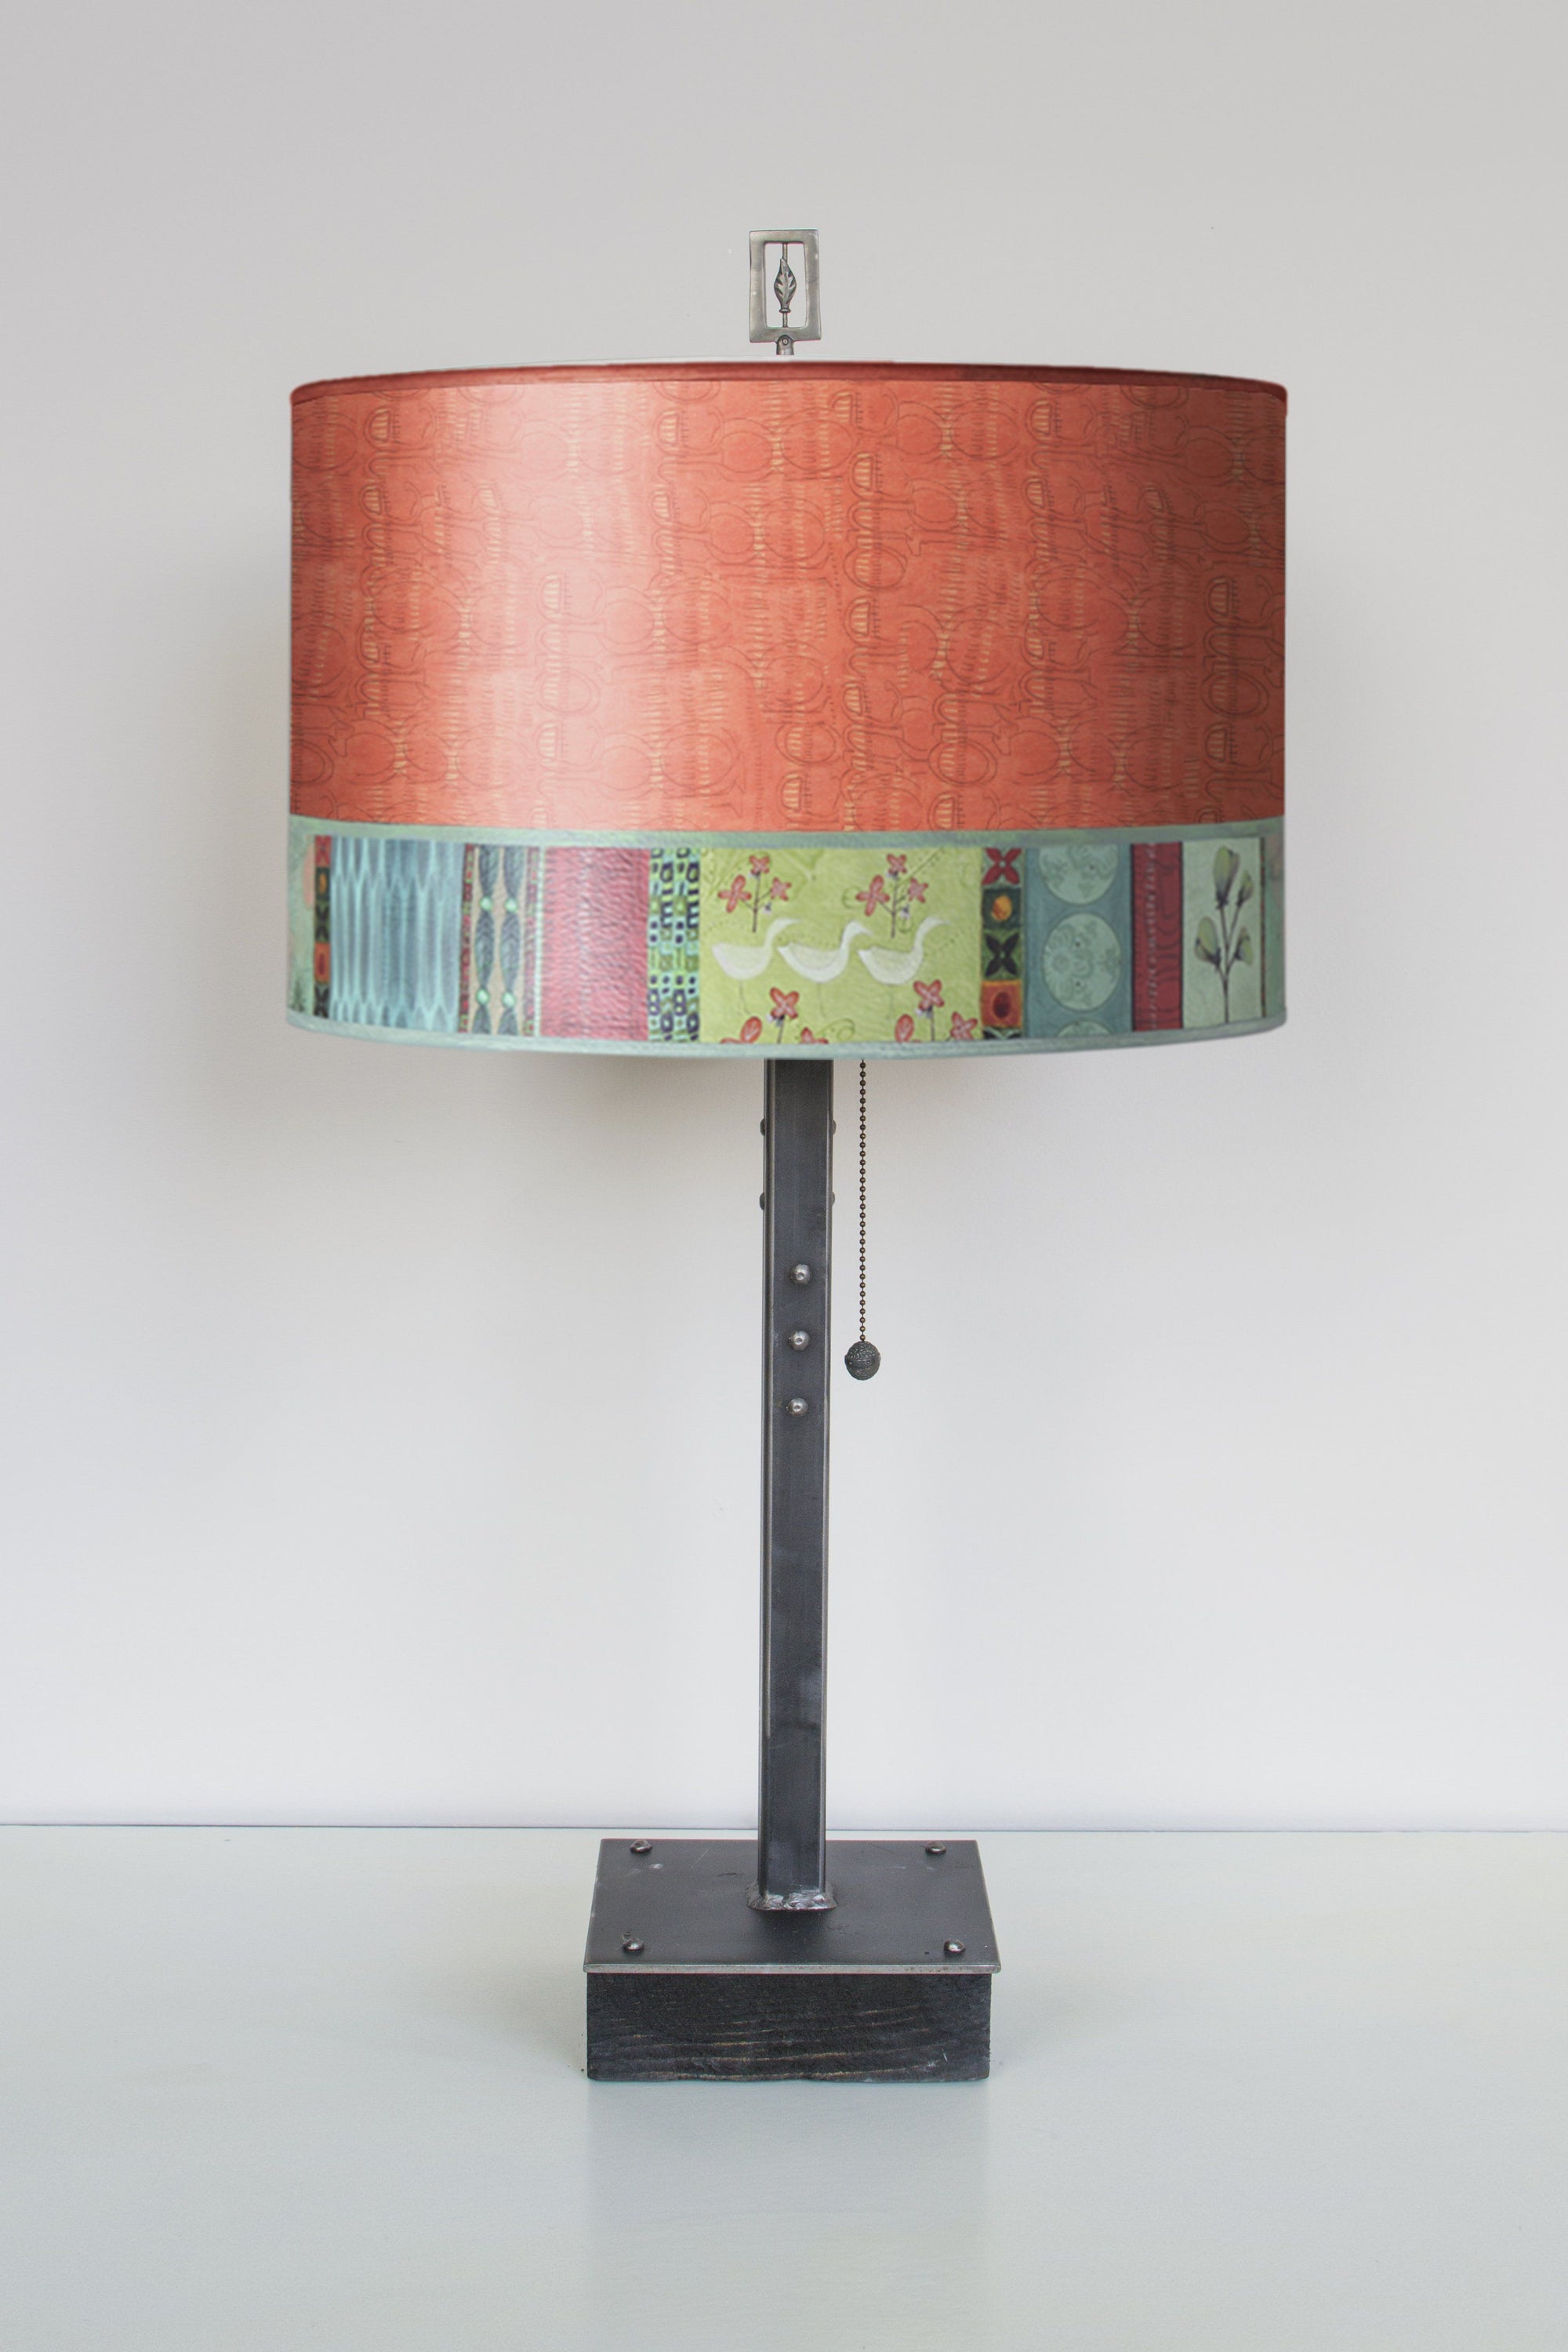 Janna Ugone & Co Table Lamps Steel Table Lamp on Wood with Large Drum Shade in Melody in Coral